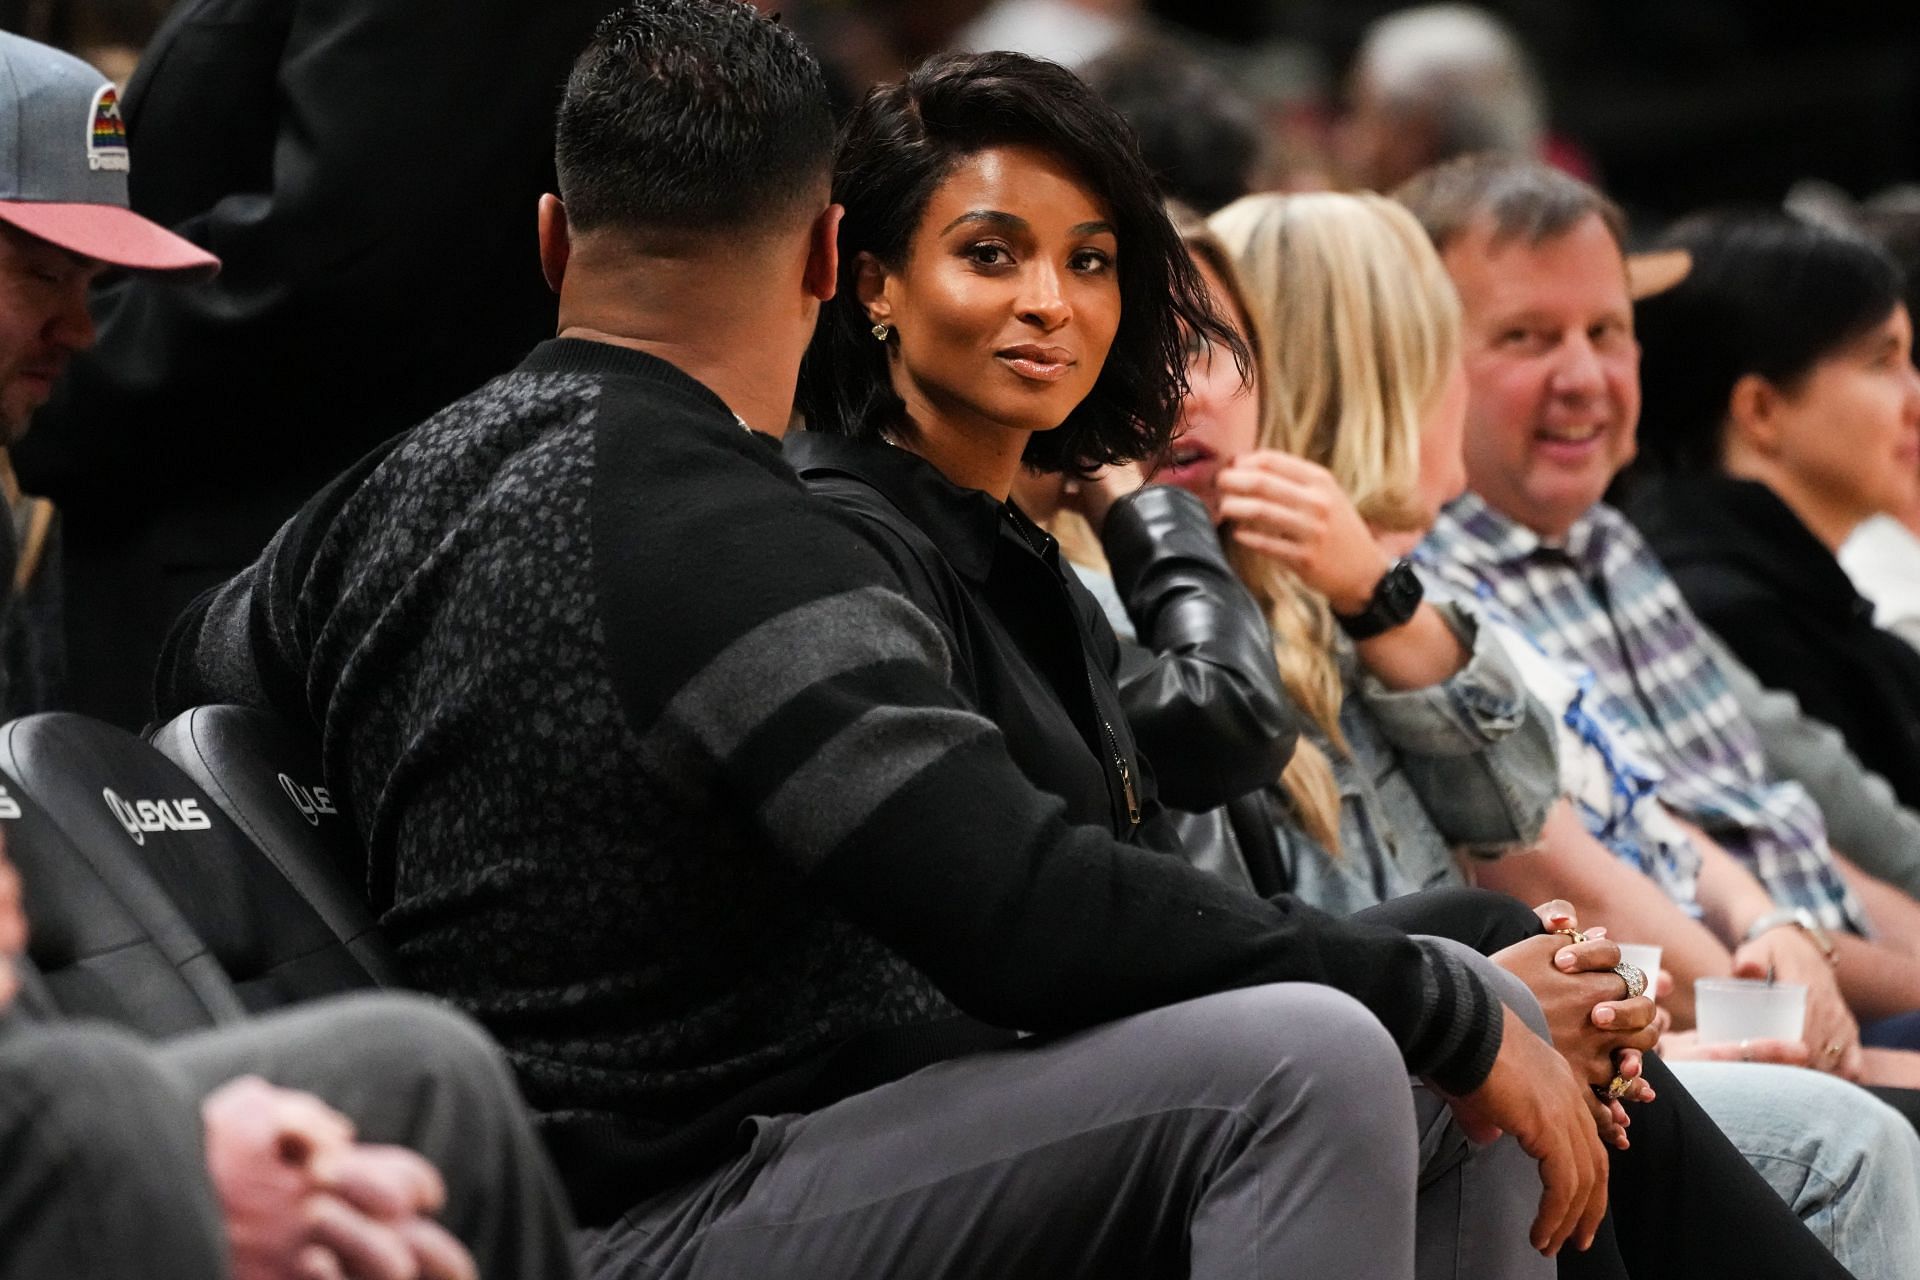 Singer Ciara with husband, Broncos QB Russell Wilson